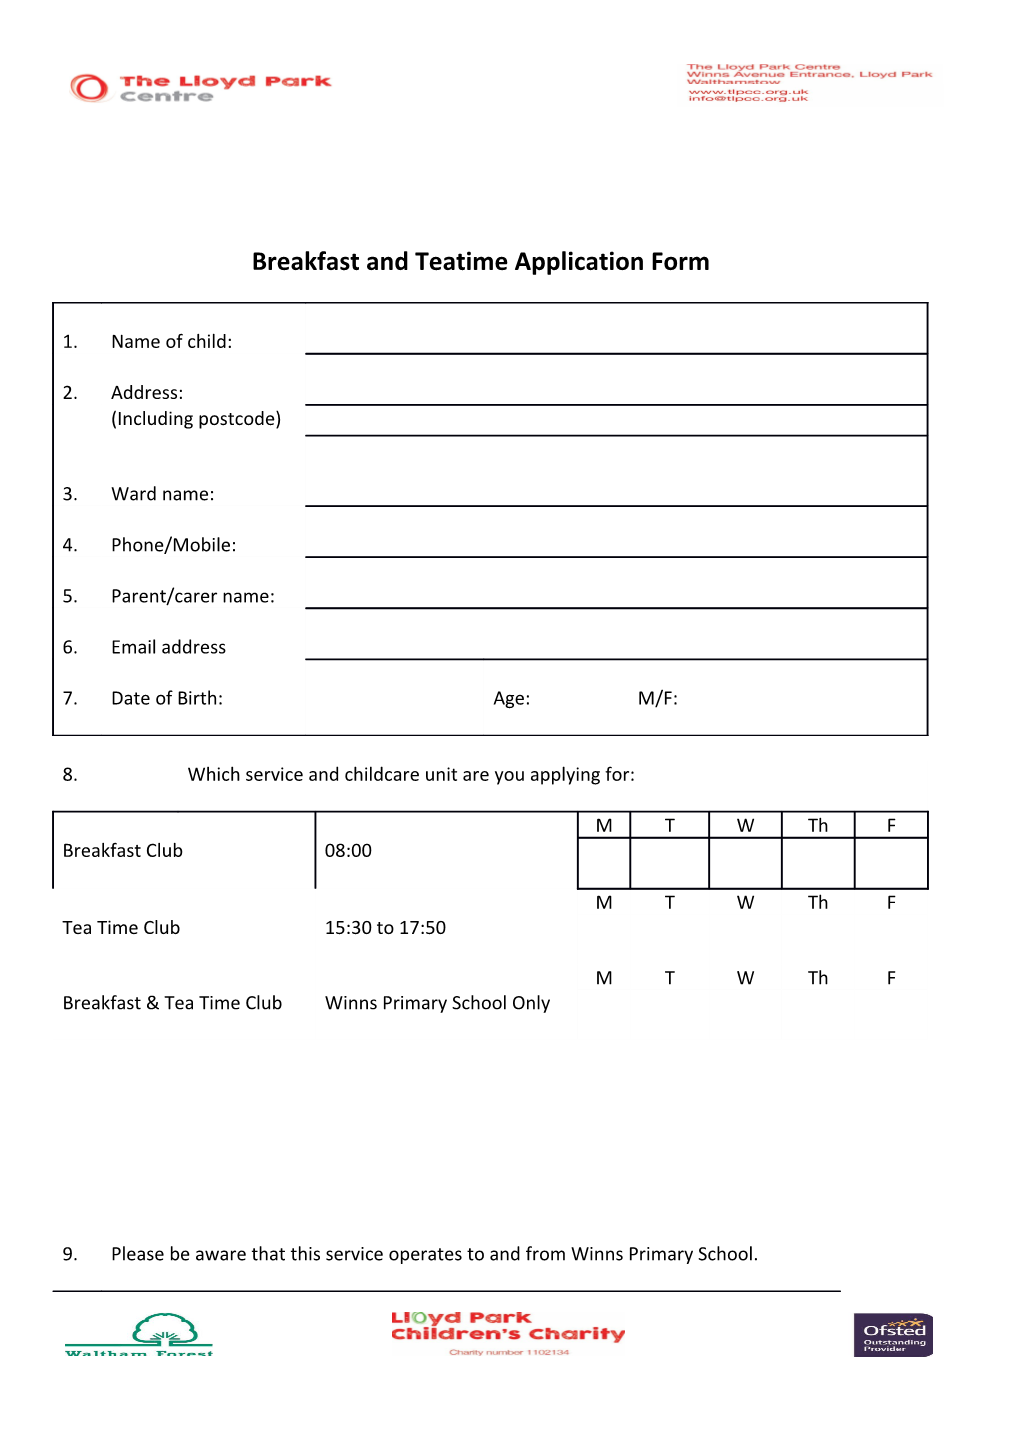 Breakfast and Teatime Application Form